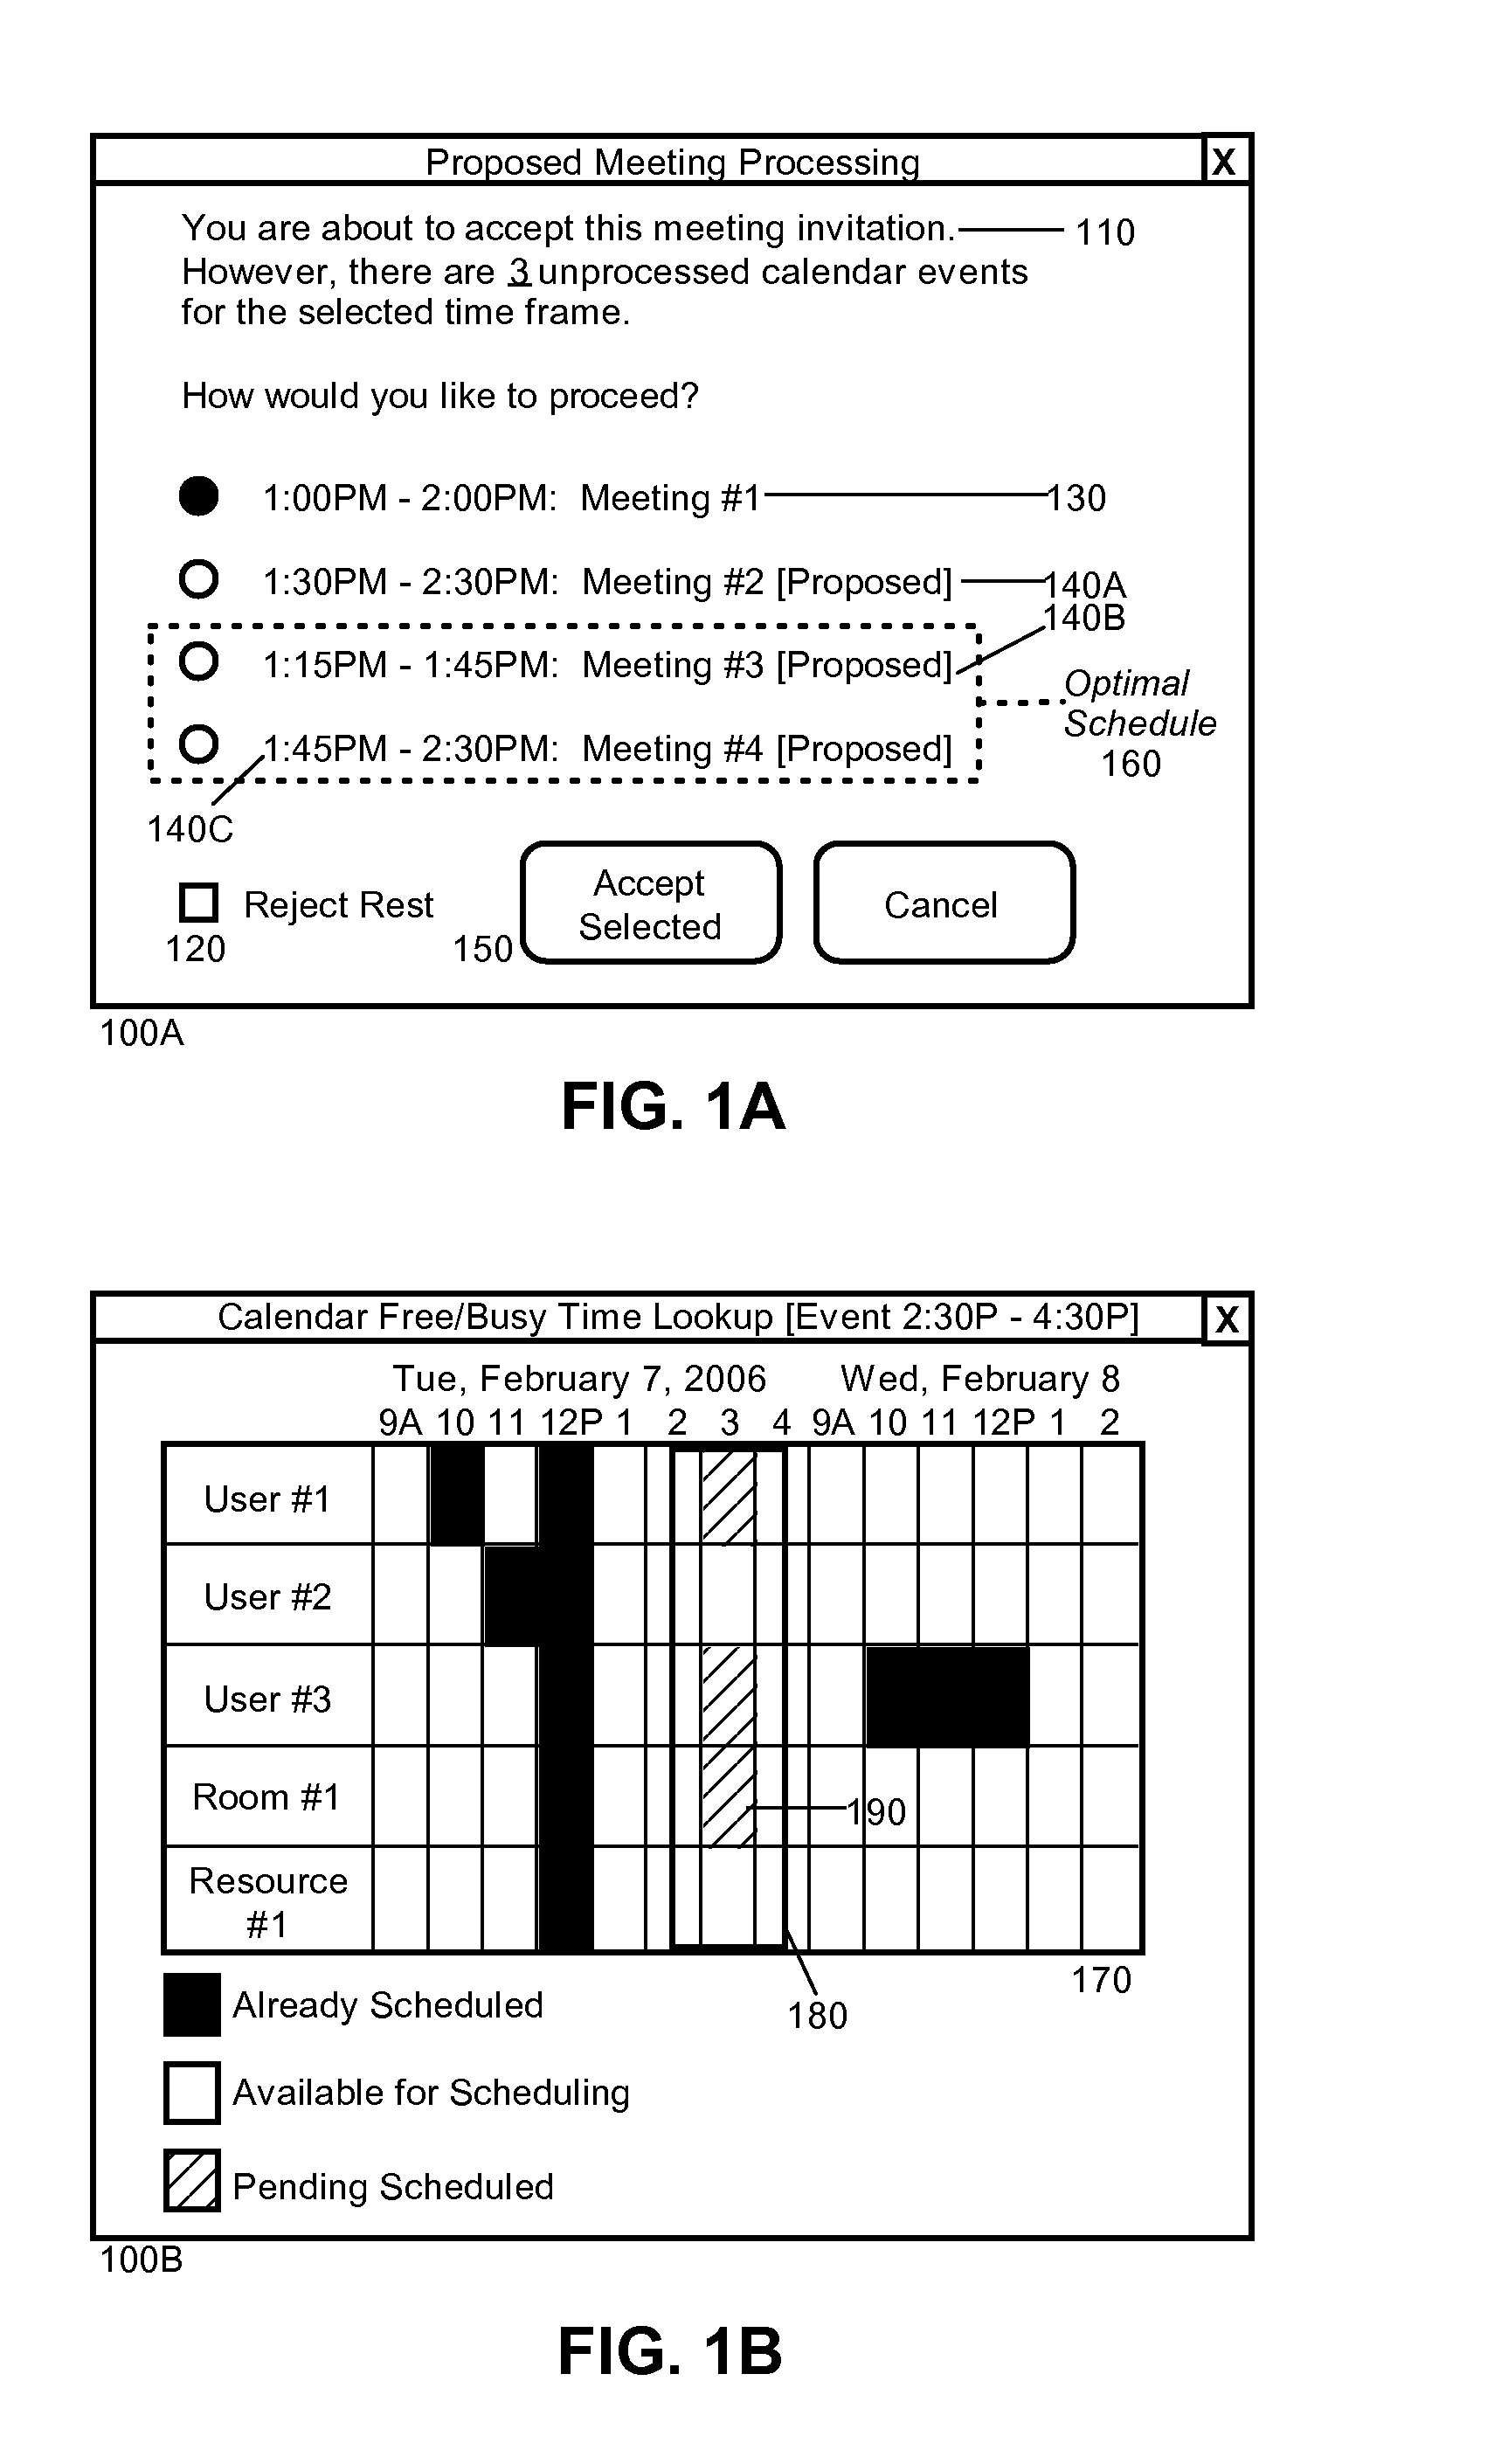 Event scheduling conflict management and resolution for unprocessed events in a collaborative computing environment